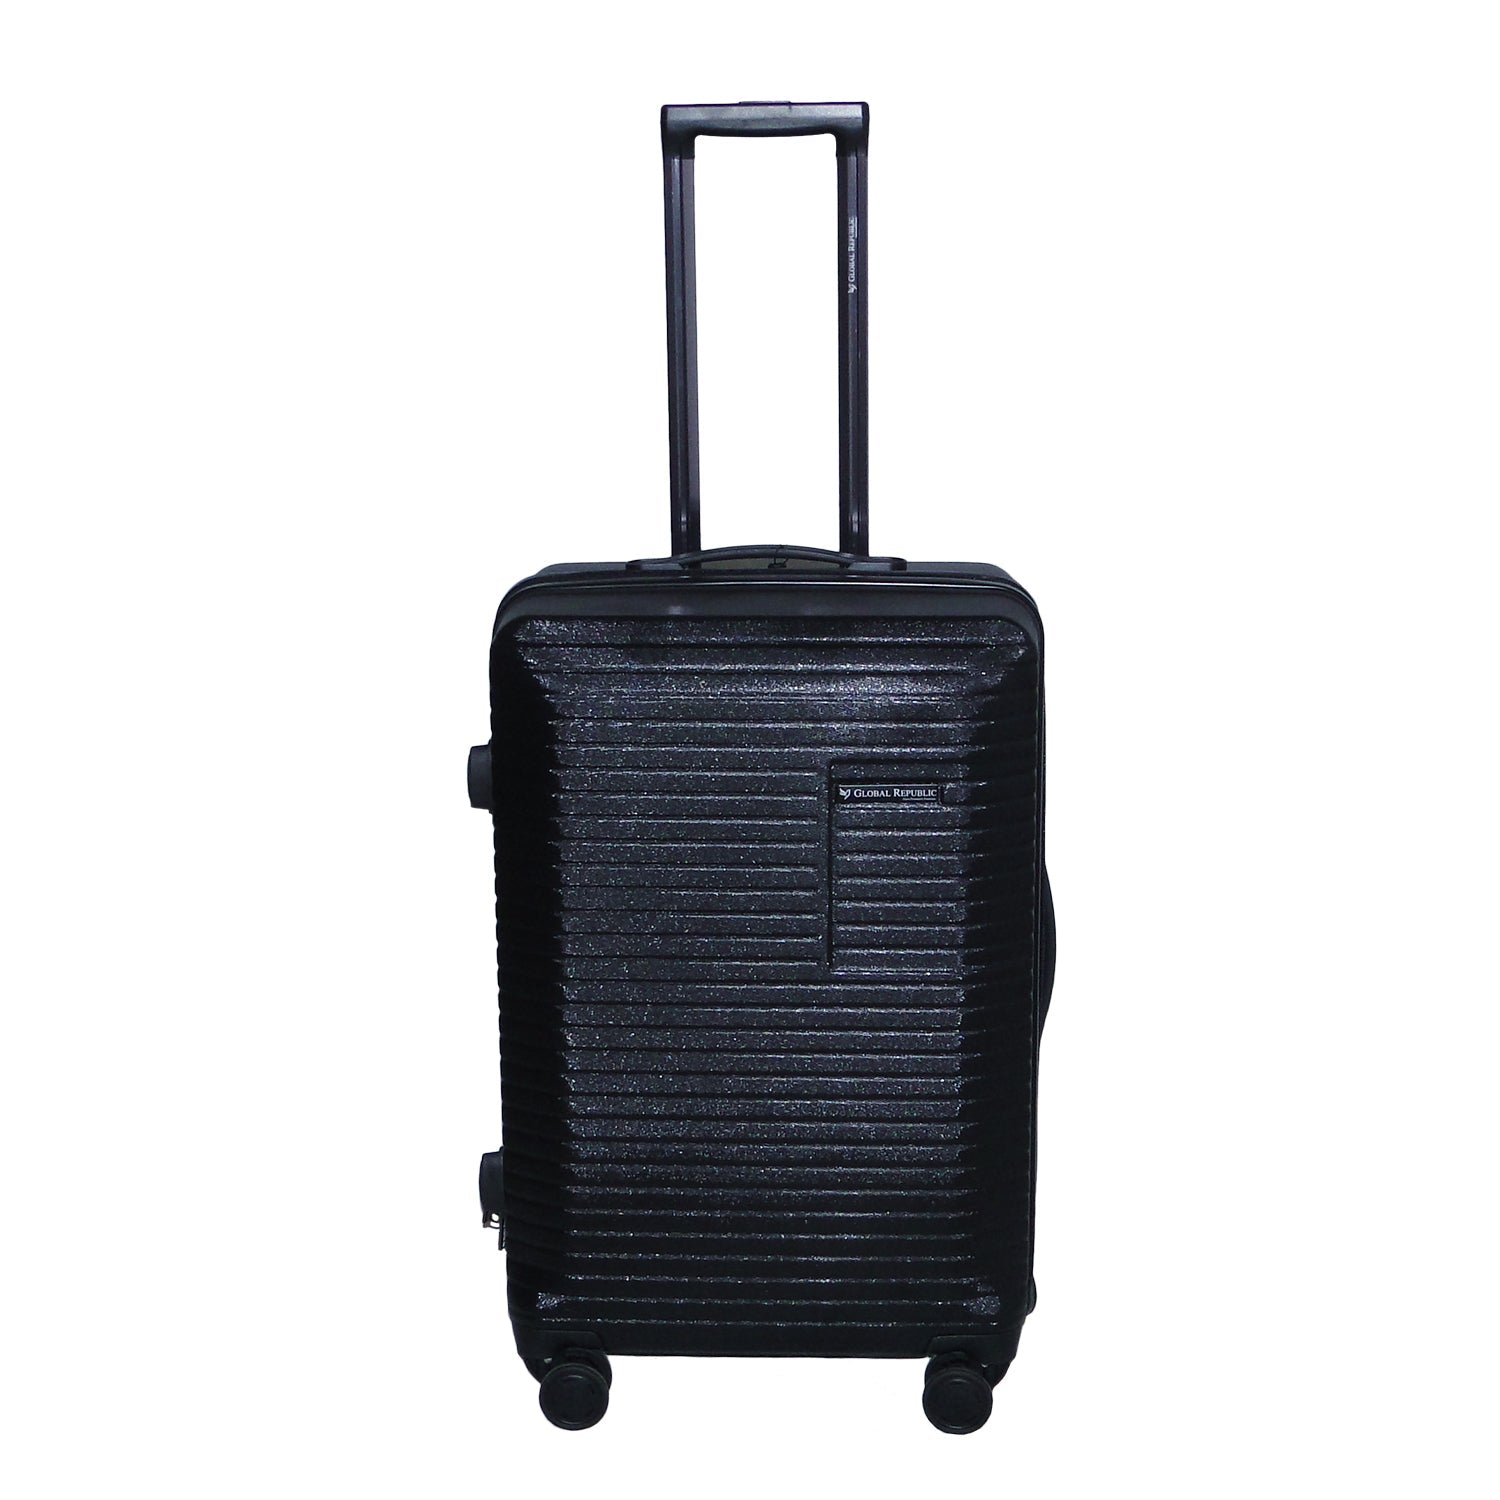 Medium Size Light Polycarbonate Trolley Luggage Bags (Black Color)